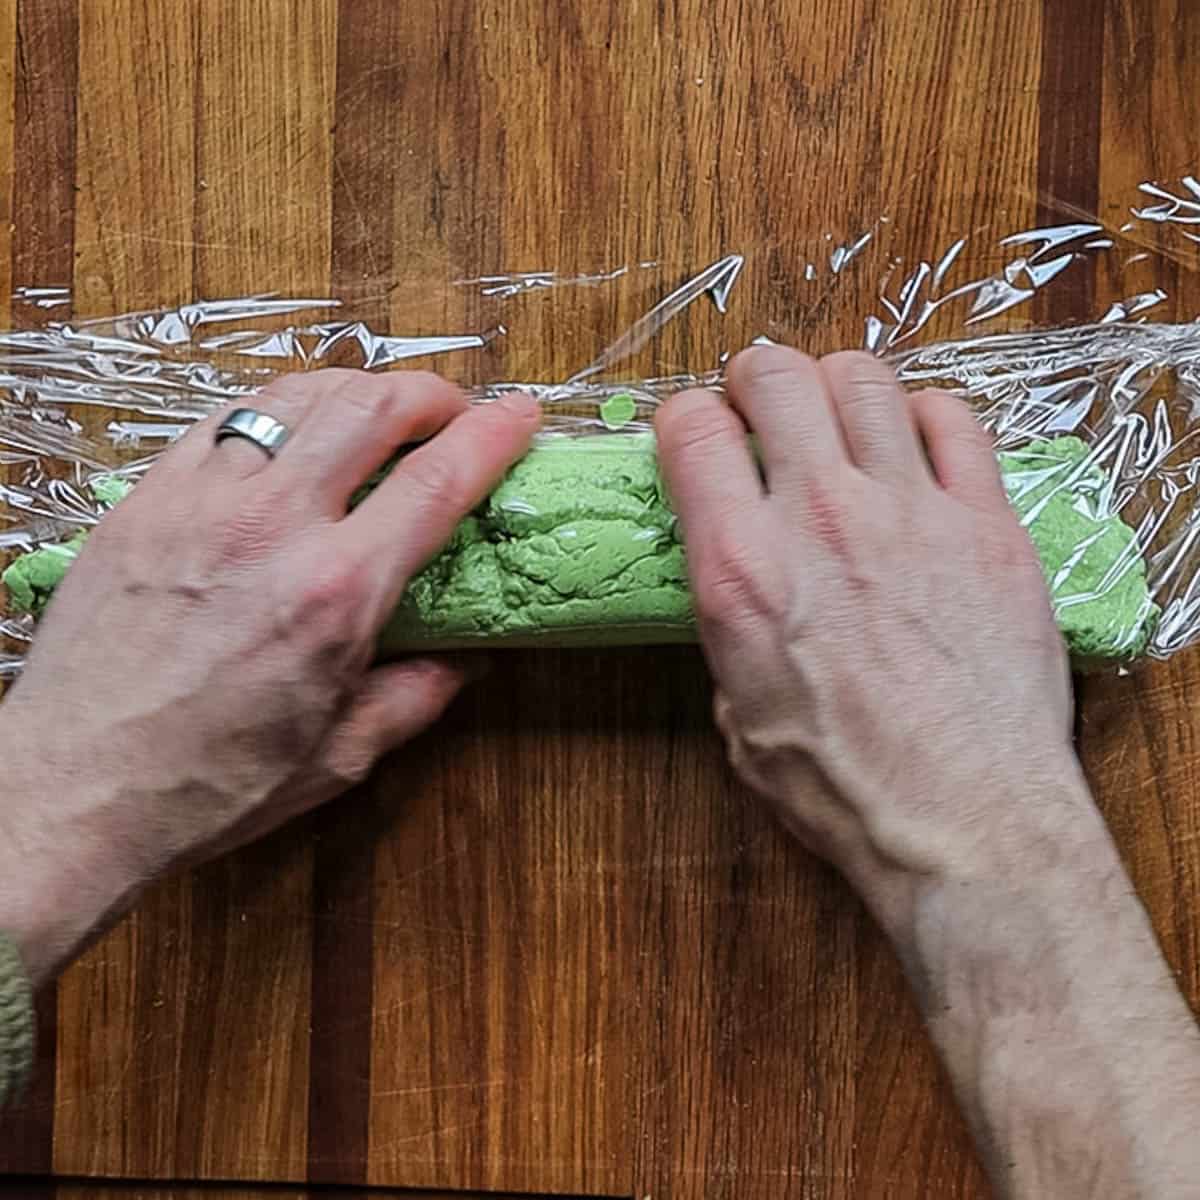 Rolling green ramp compound butter into a log form. 